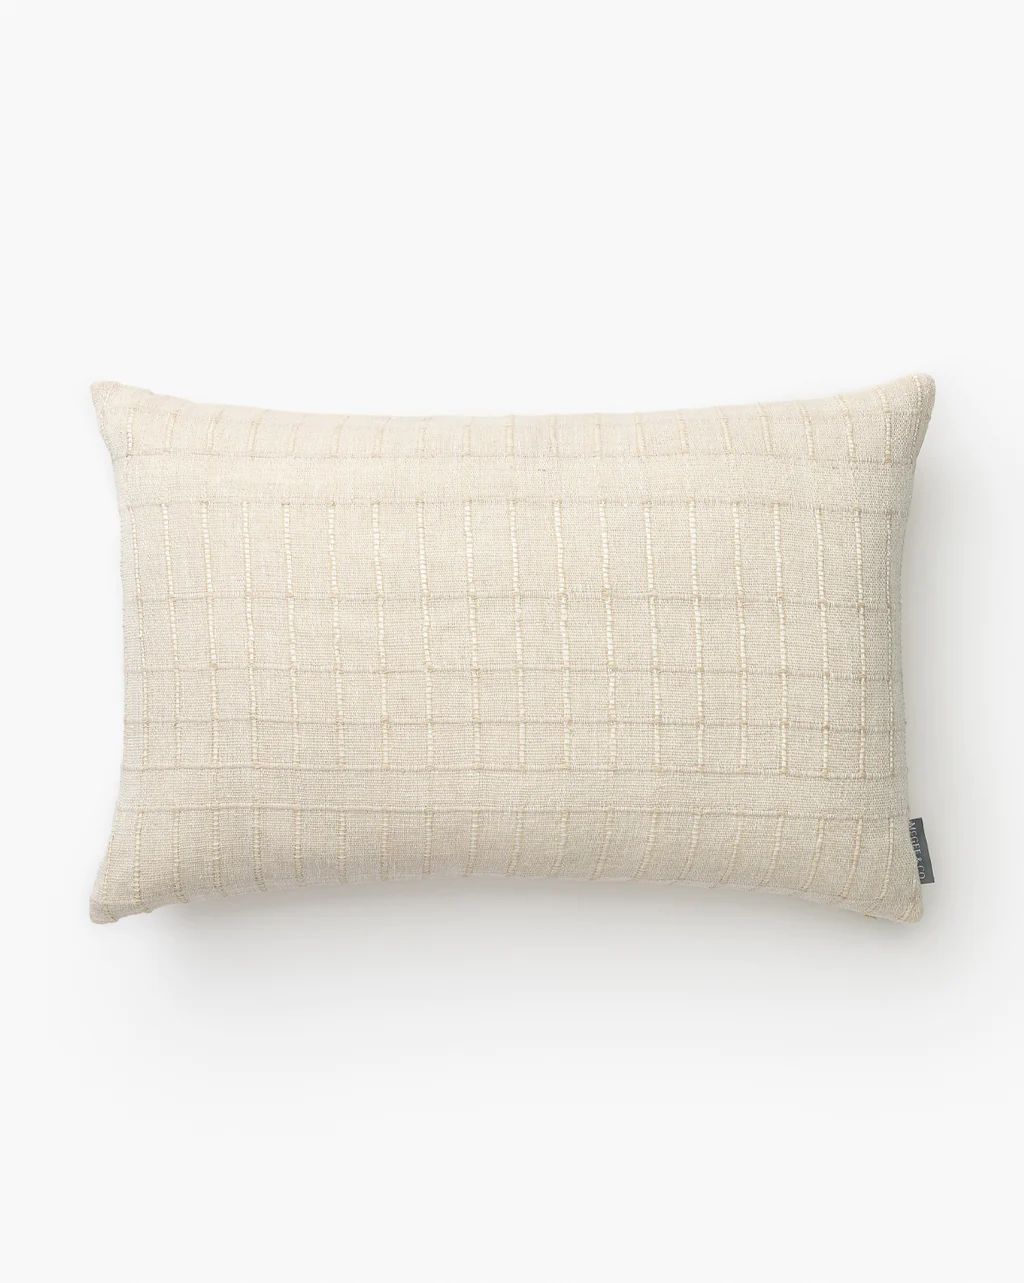 Diana Pillow Cover | McGee & Co.